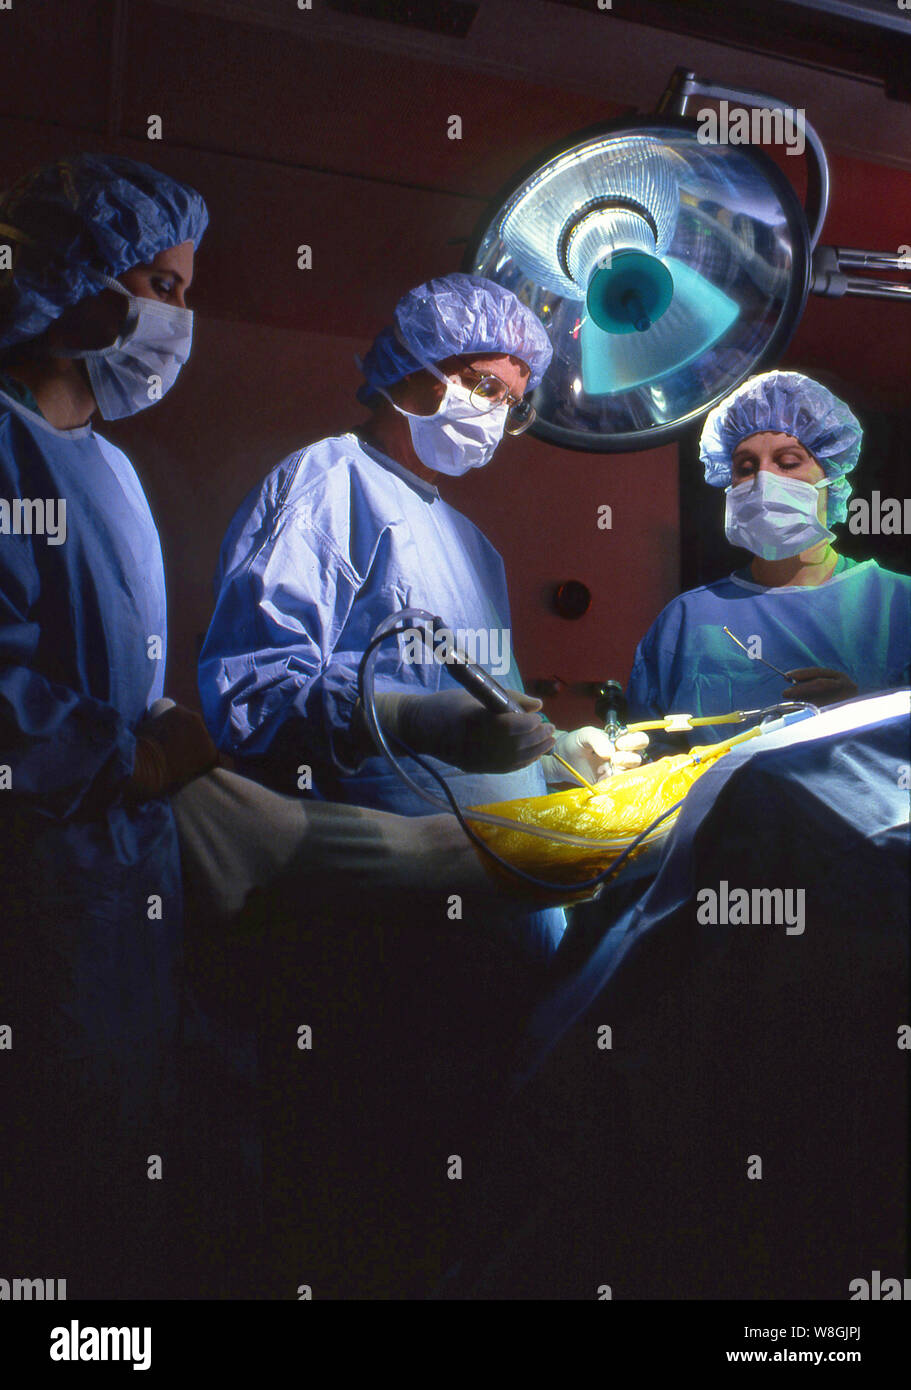 Medical professionals attending to patients Stock Photo